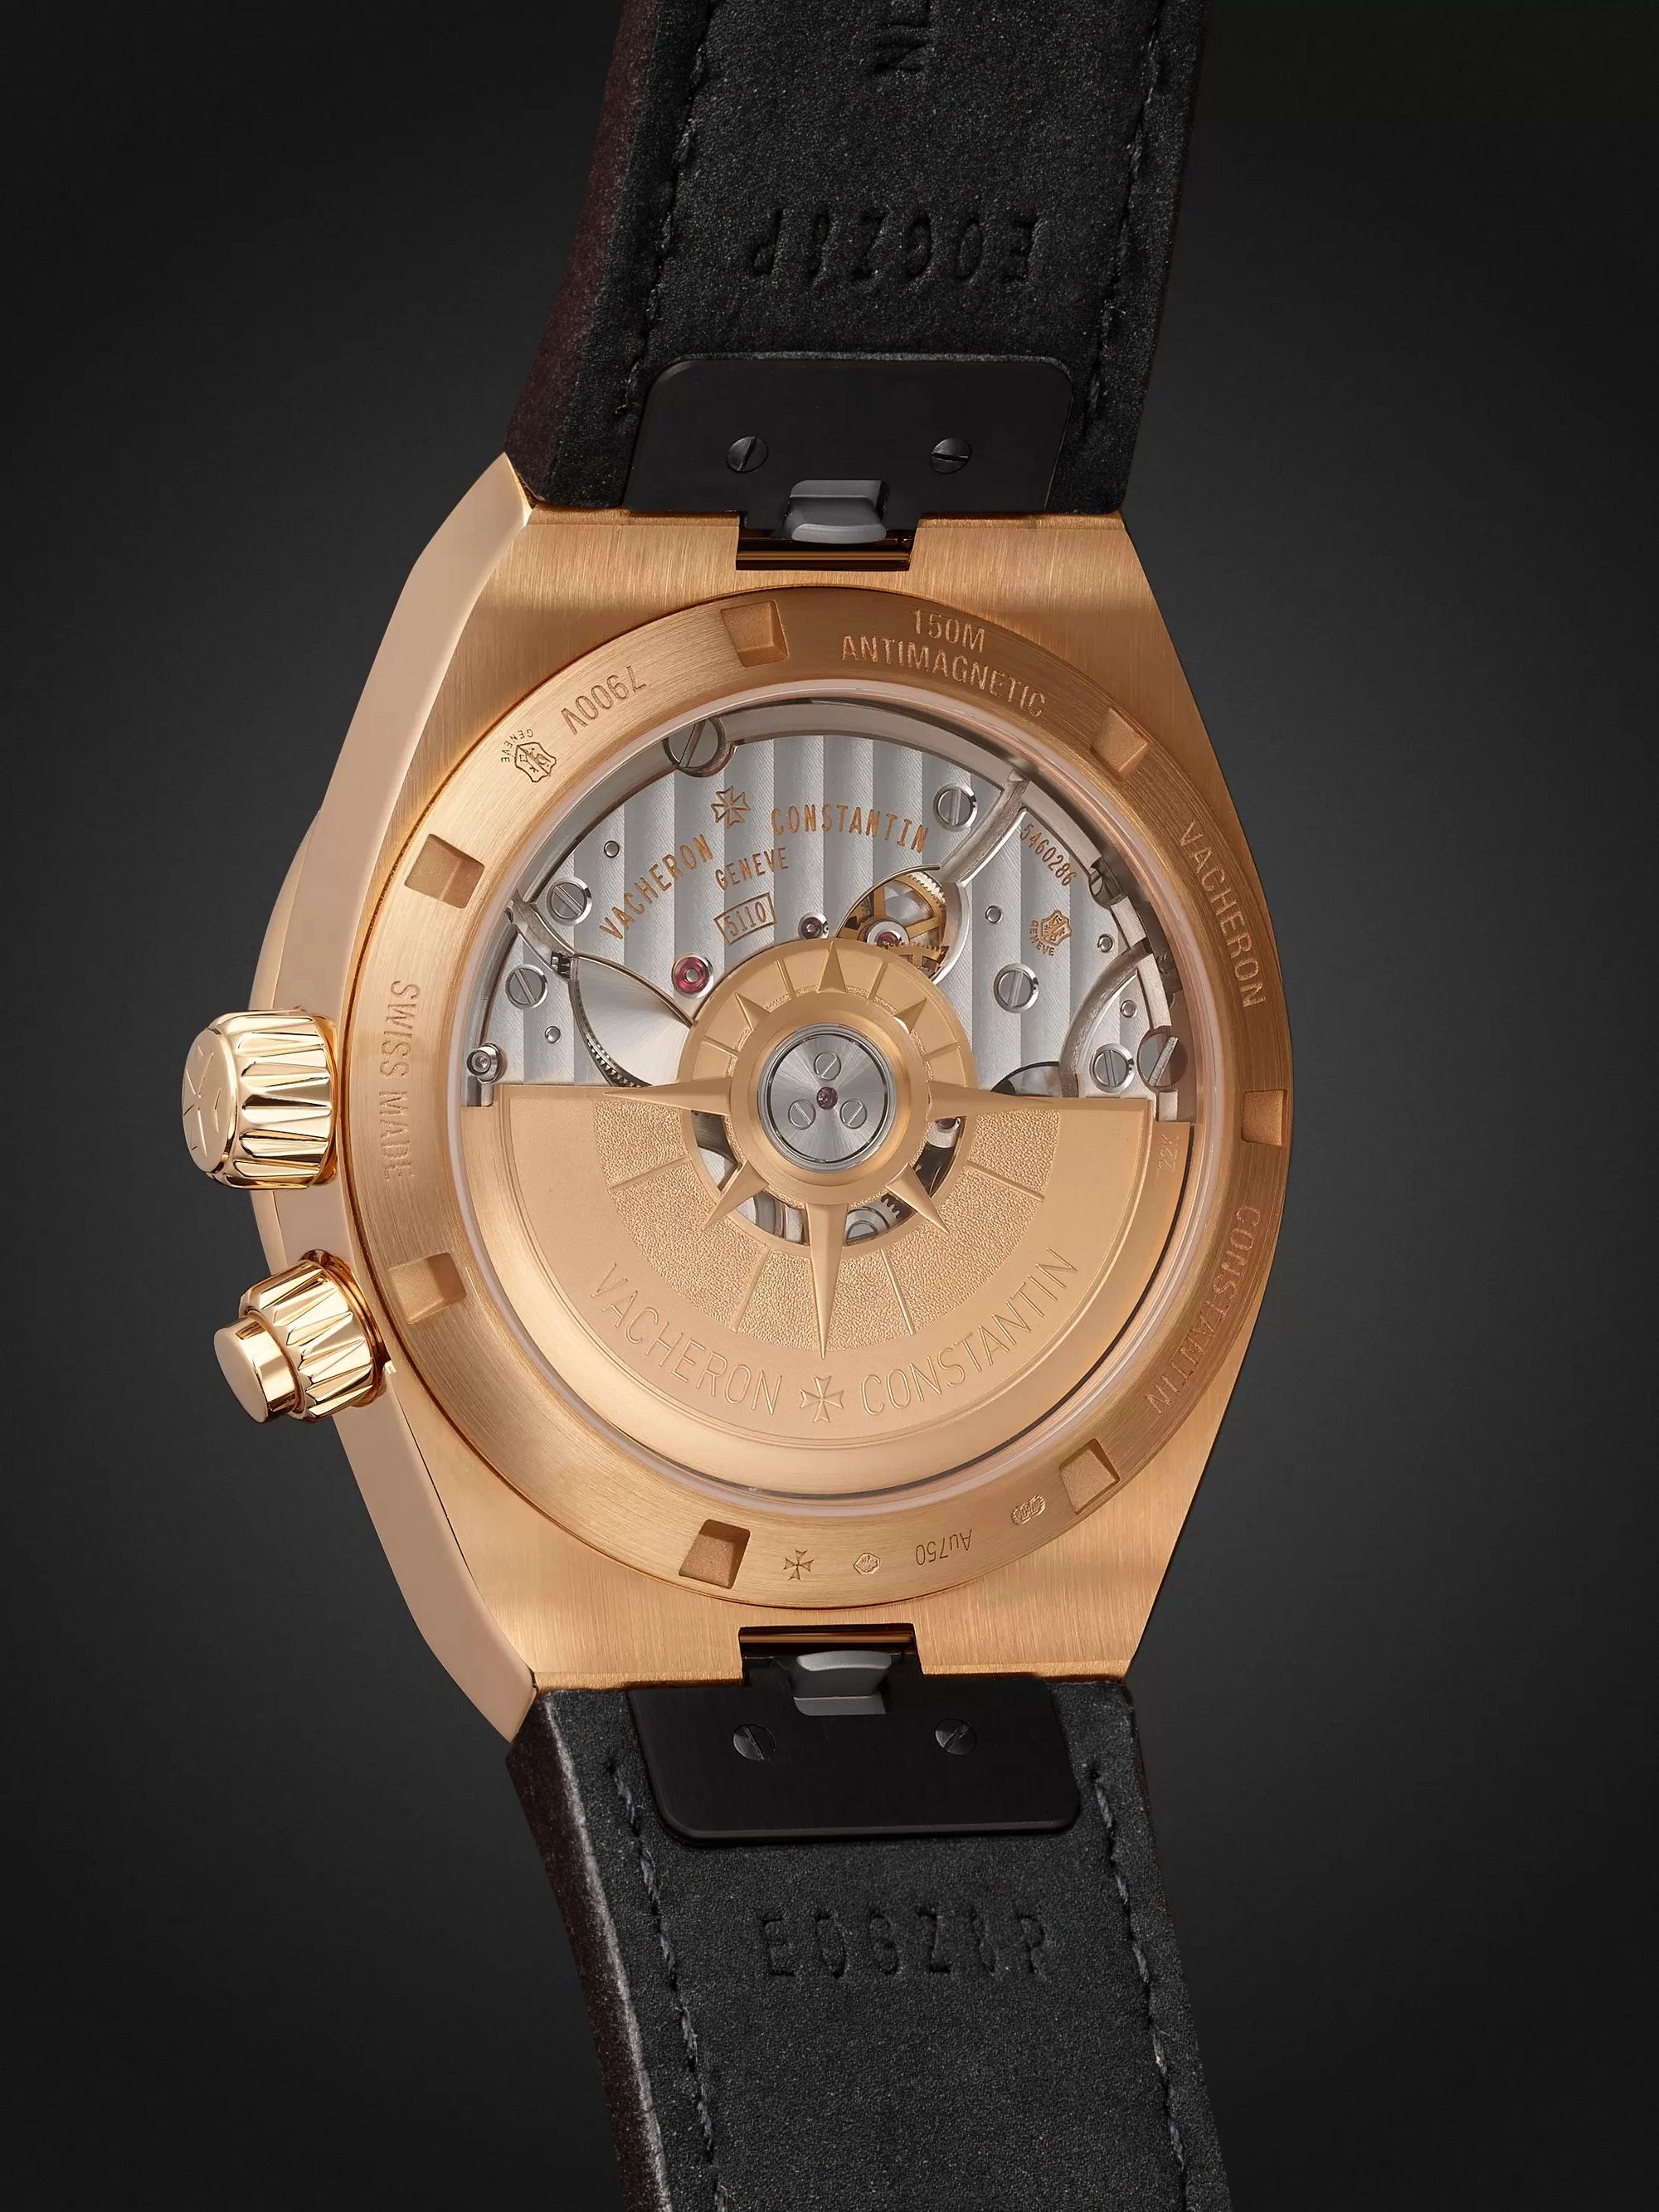 VACHERON CONSTANTIN Overseas Dual Time Automatic 41mm 18-Karat Pink Gold and Leather Watch, Ref. No. 7900V/000R-B336